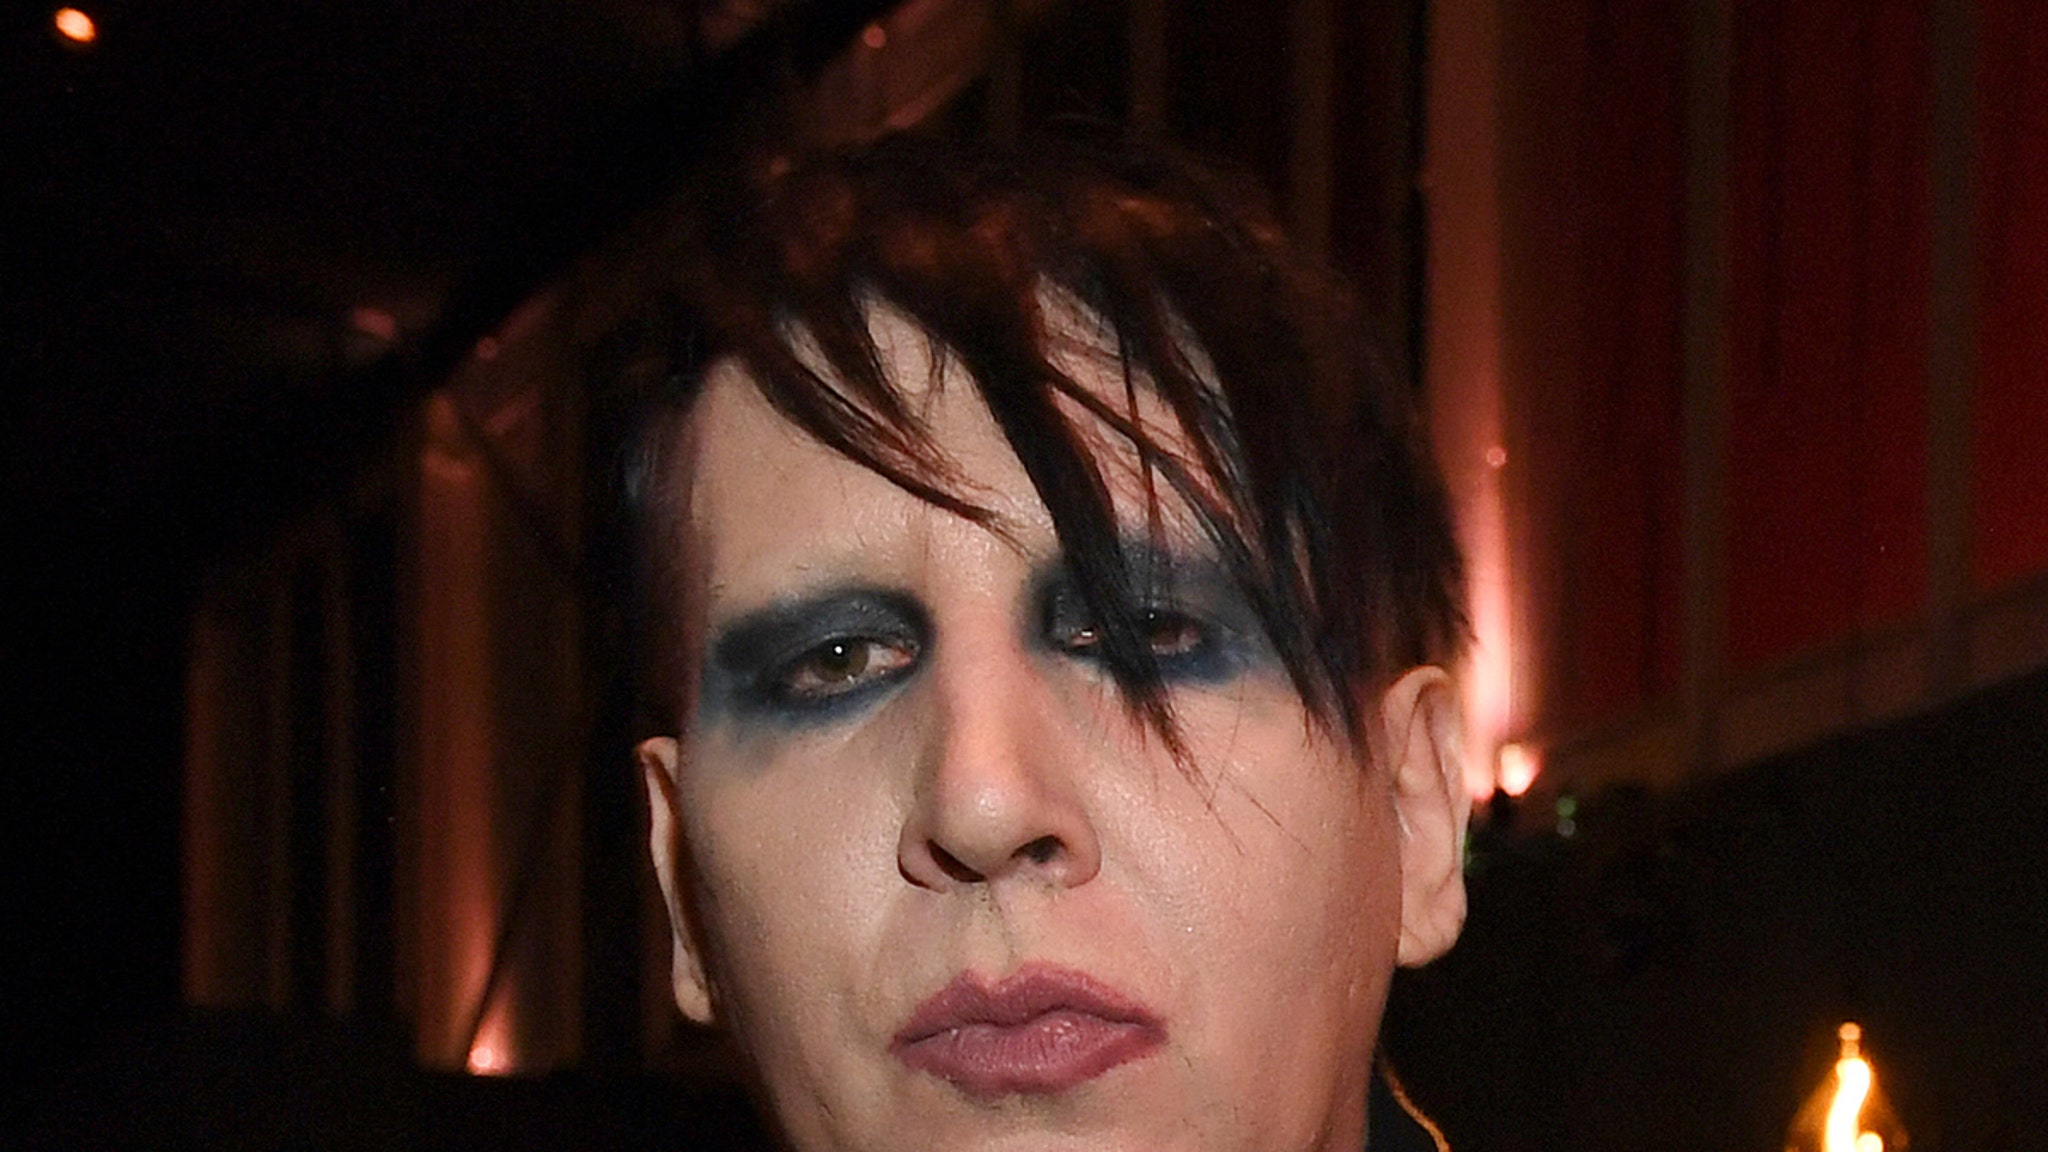 Police officers working on Marilyn Manson allegations of abuse